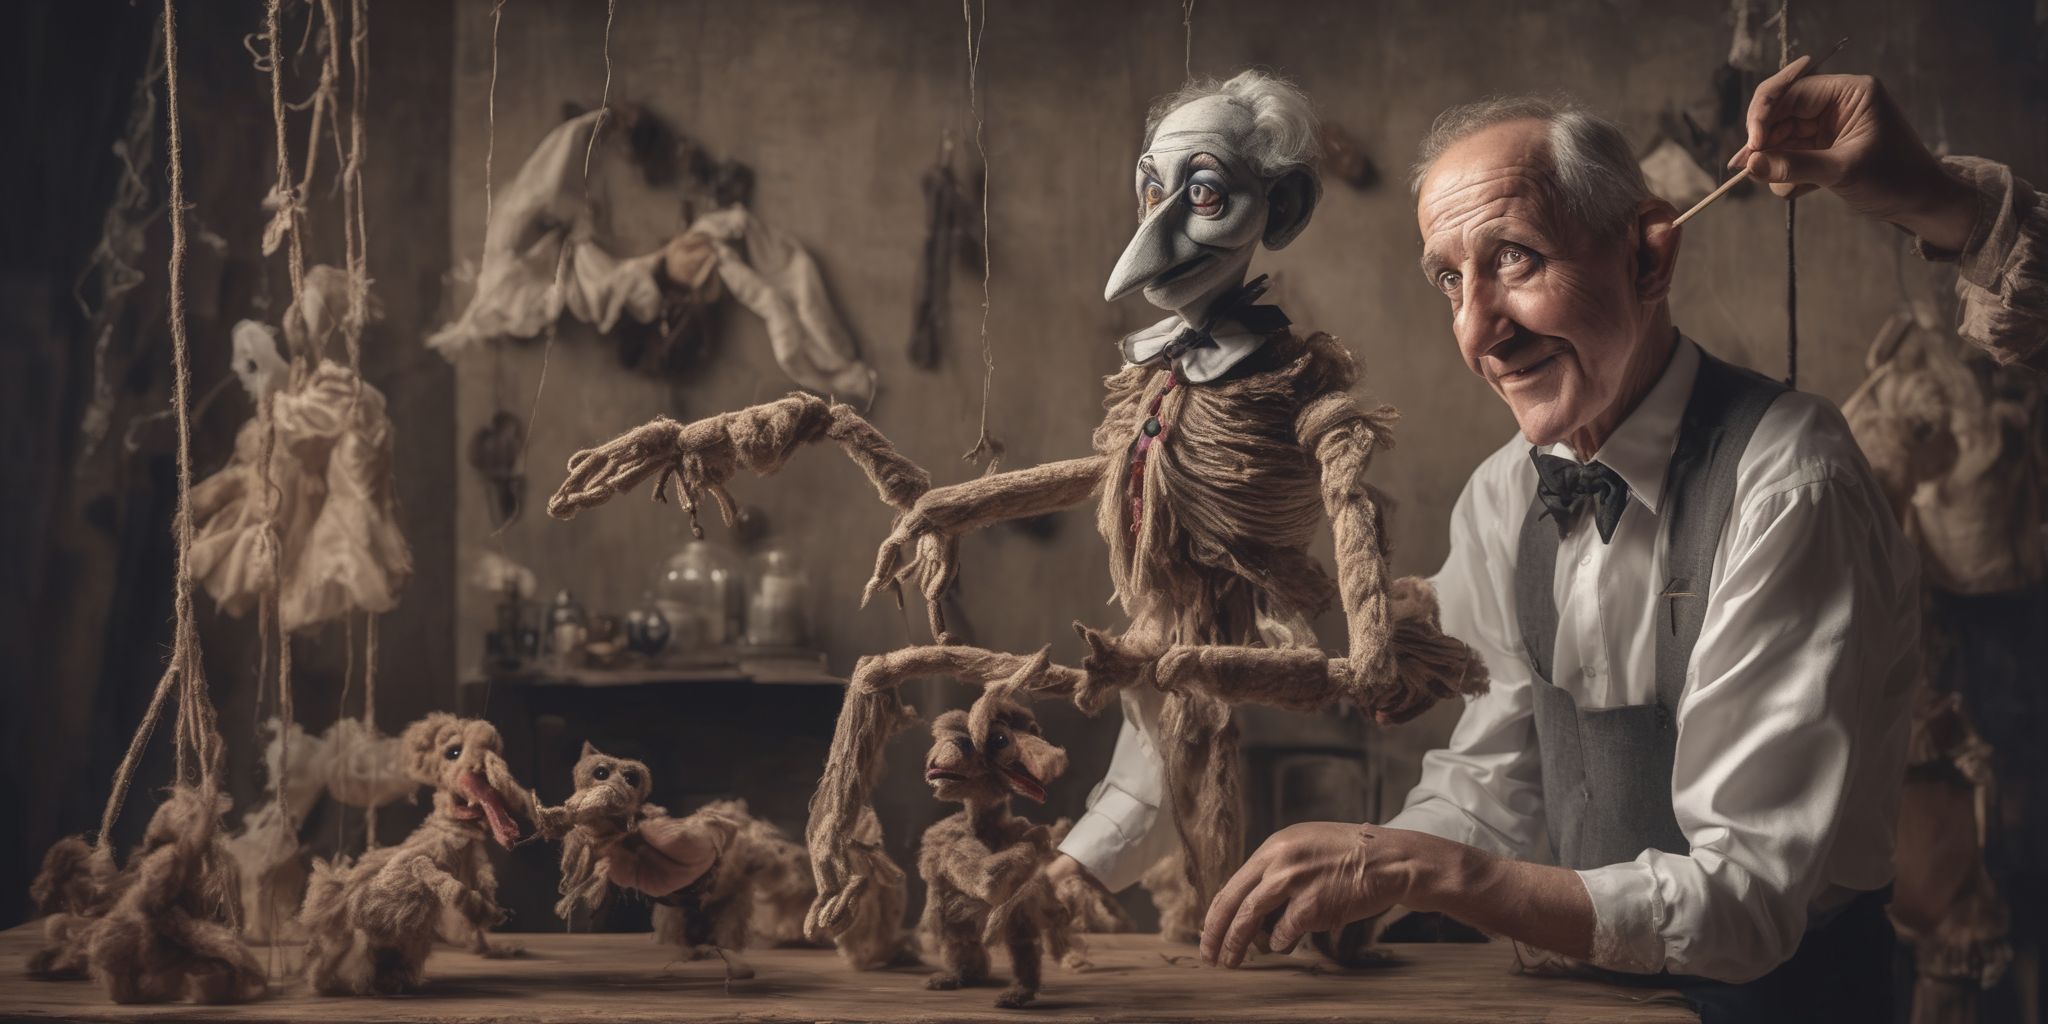 Puppeteer  in realistic, photographic style